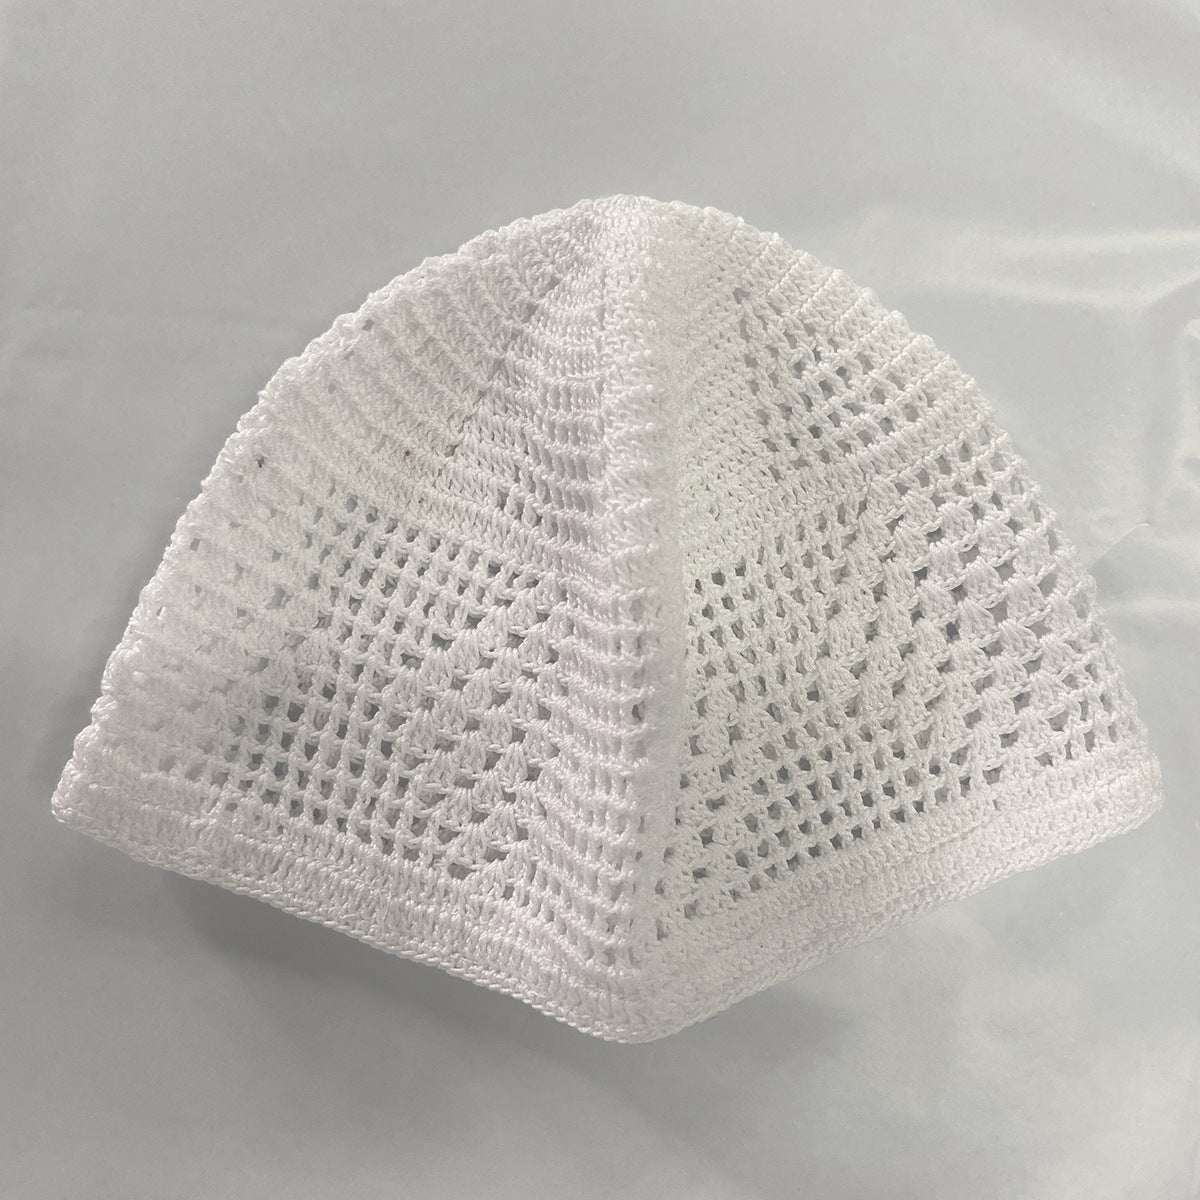 Discover serenity in prayer with Hikmah Boutique's White Muslim Prayer Cap. Hand-crafted from premium cotton, this elastic cap combines comfort and style. Experience cultural richness with subtle Kufi-inspired designed. Elevate your spiritual journey with our exclusive, lightweight prayer cap.